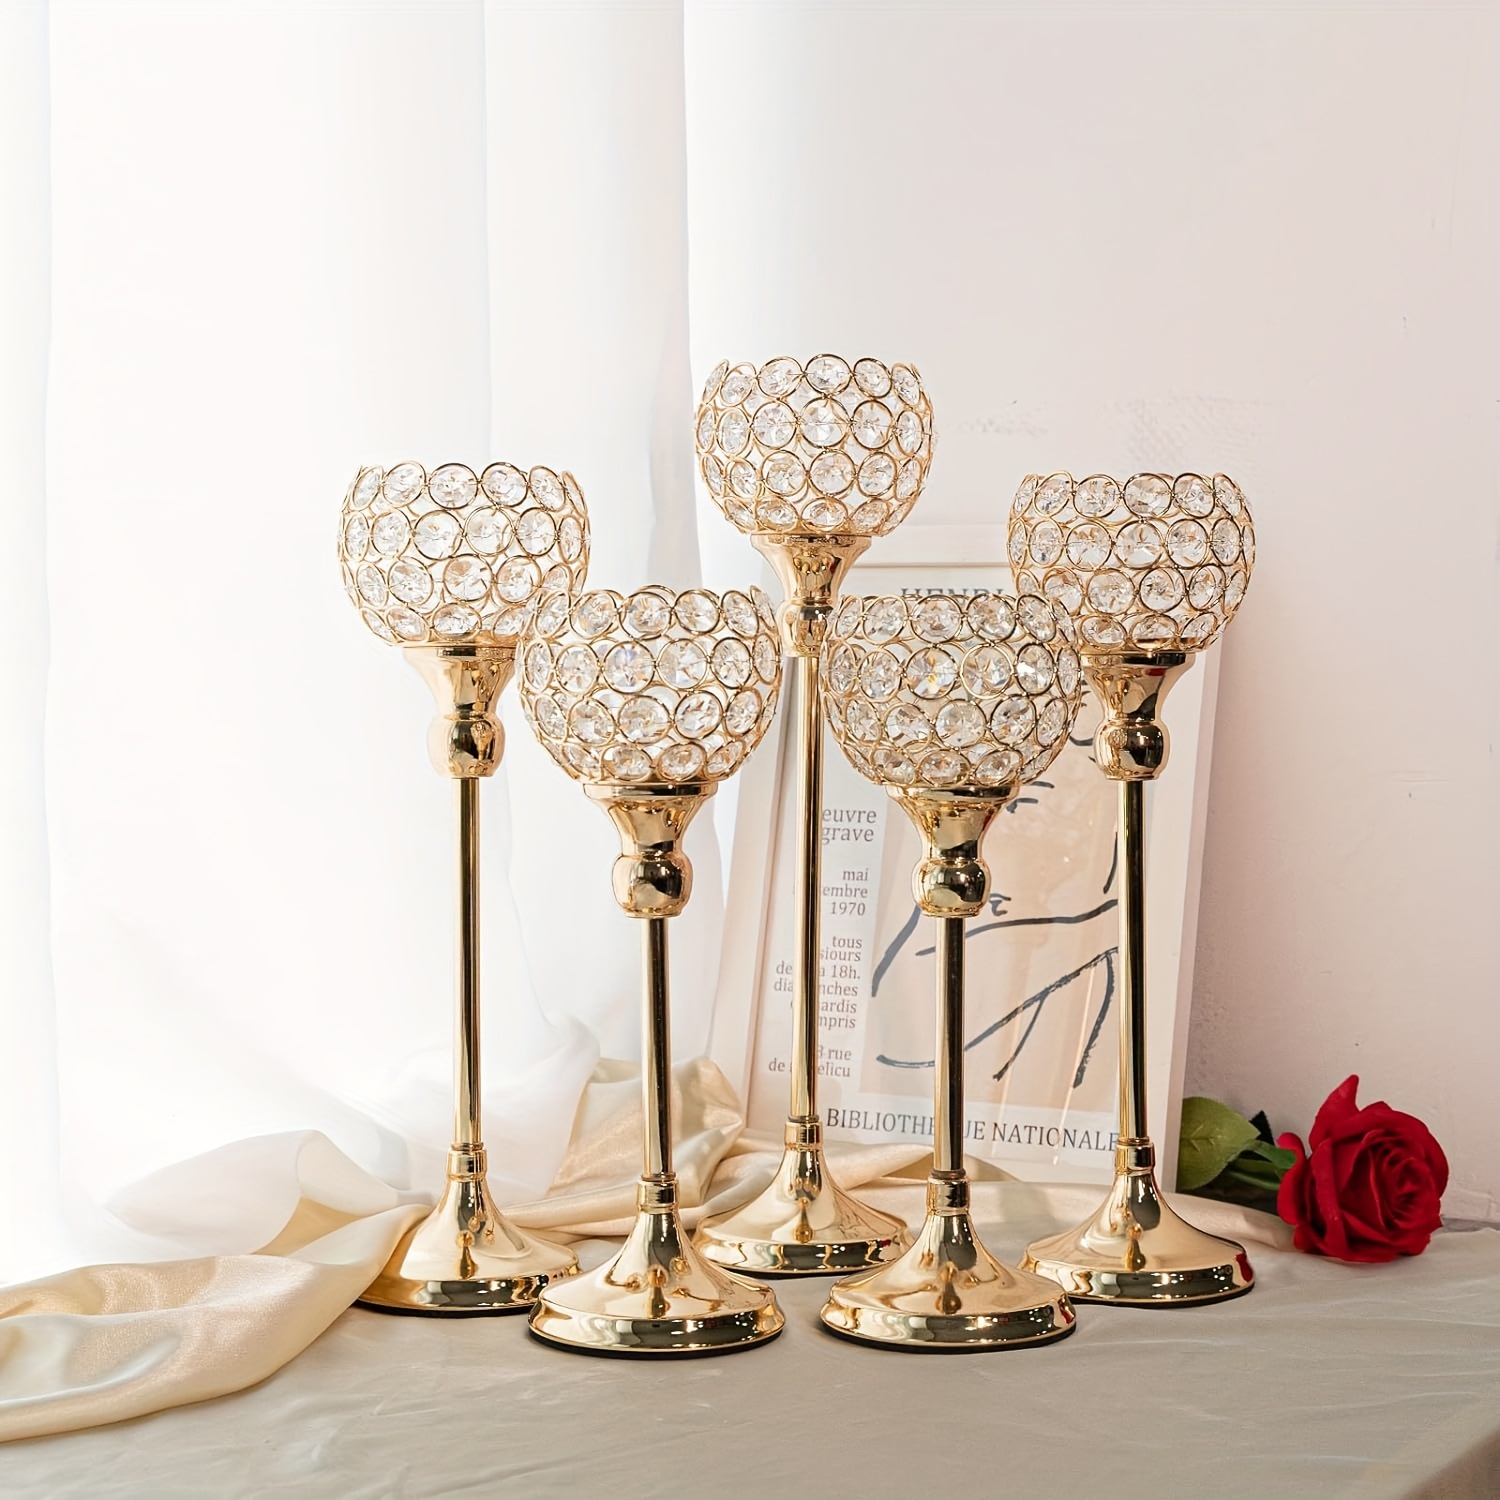 

Set Of 5 Gold Crystal Candle Holder, Tea Light Candlestick Holders For Wedding Centerpiece Decoration, Ball Candle Holder For Party Living Room Dining Table Fireplace Decor